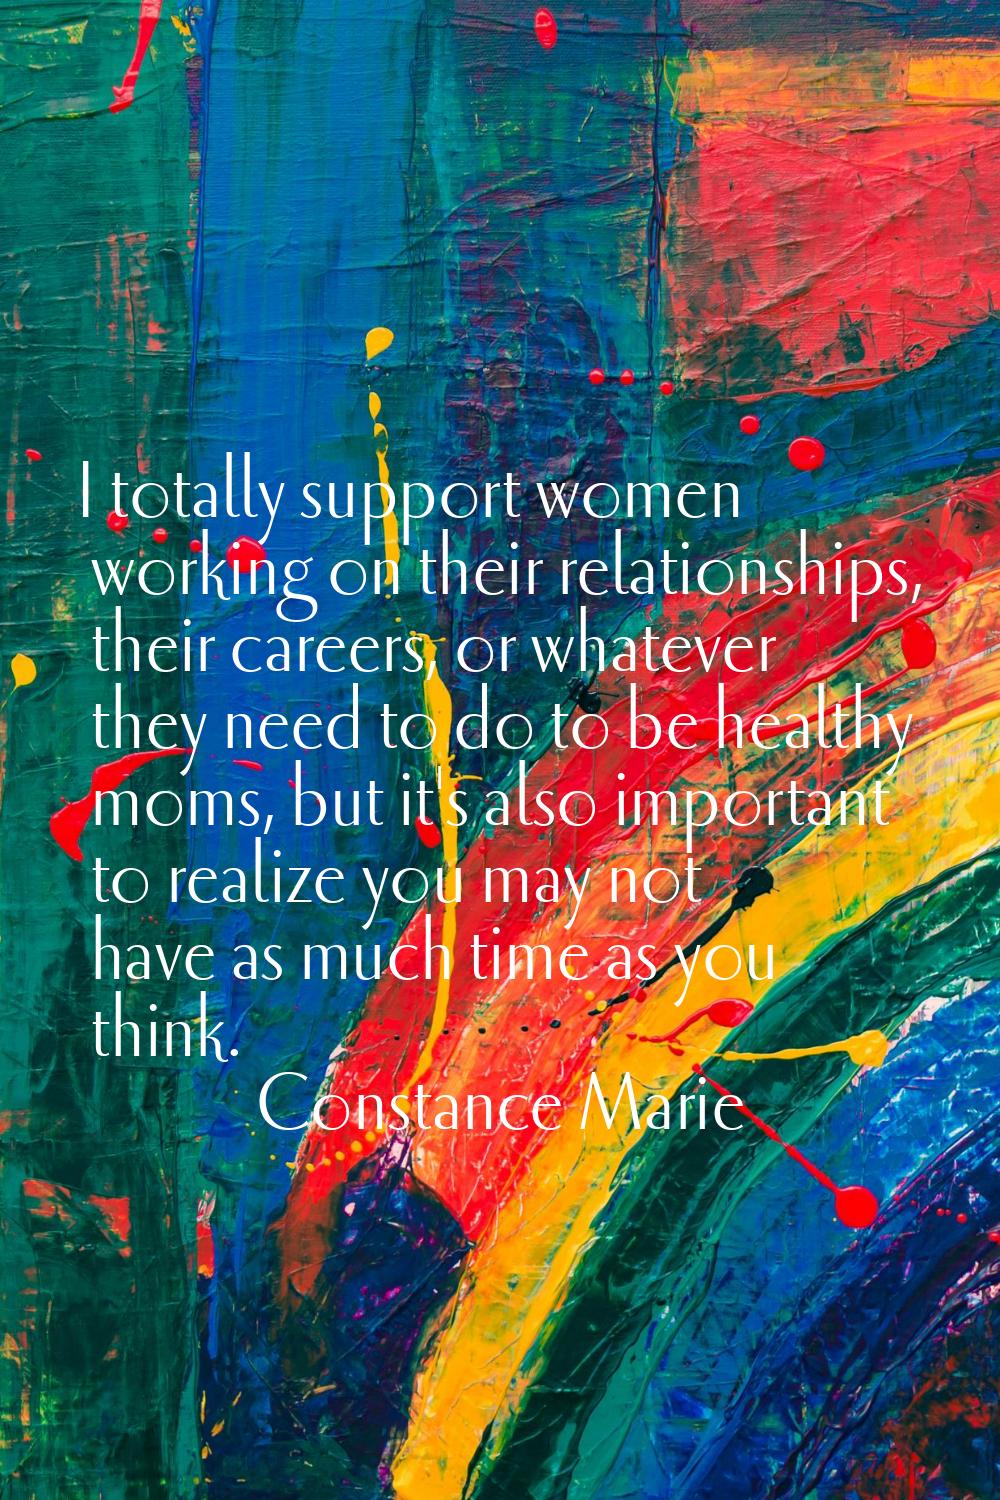 I totally support women working on their relationships, their careers, or whatever they need to do 